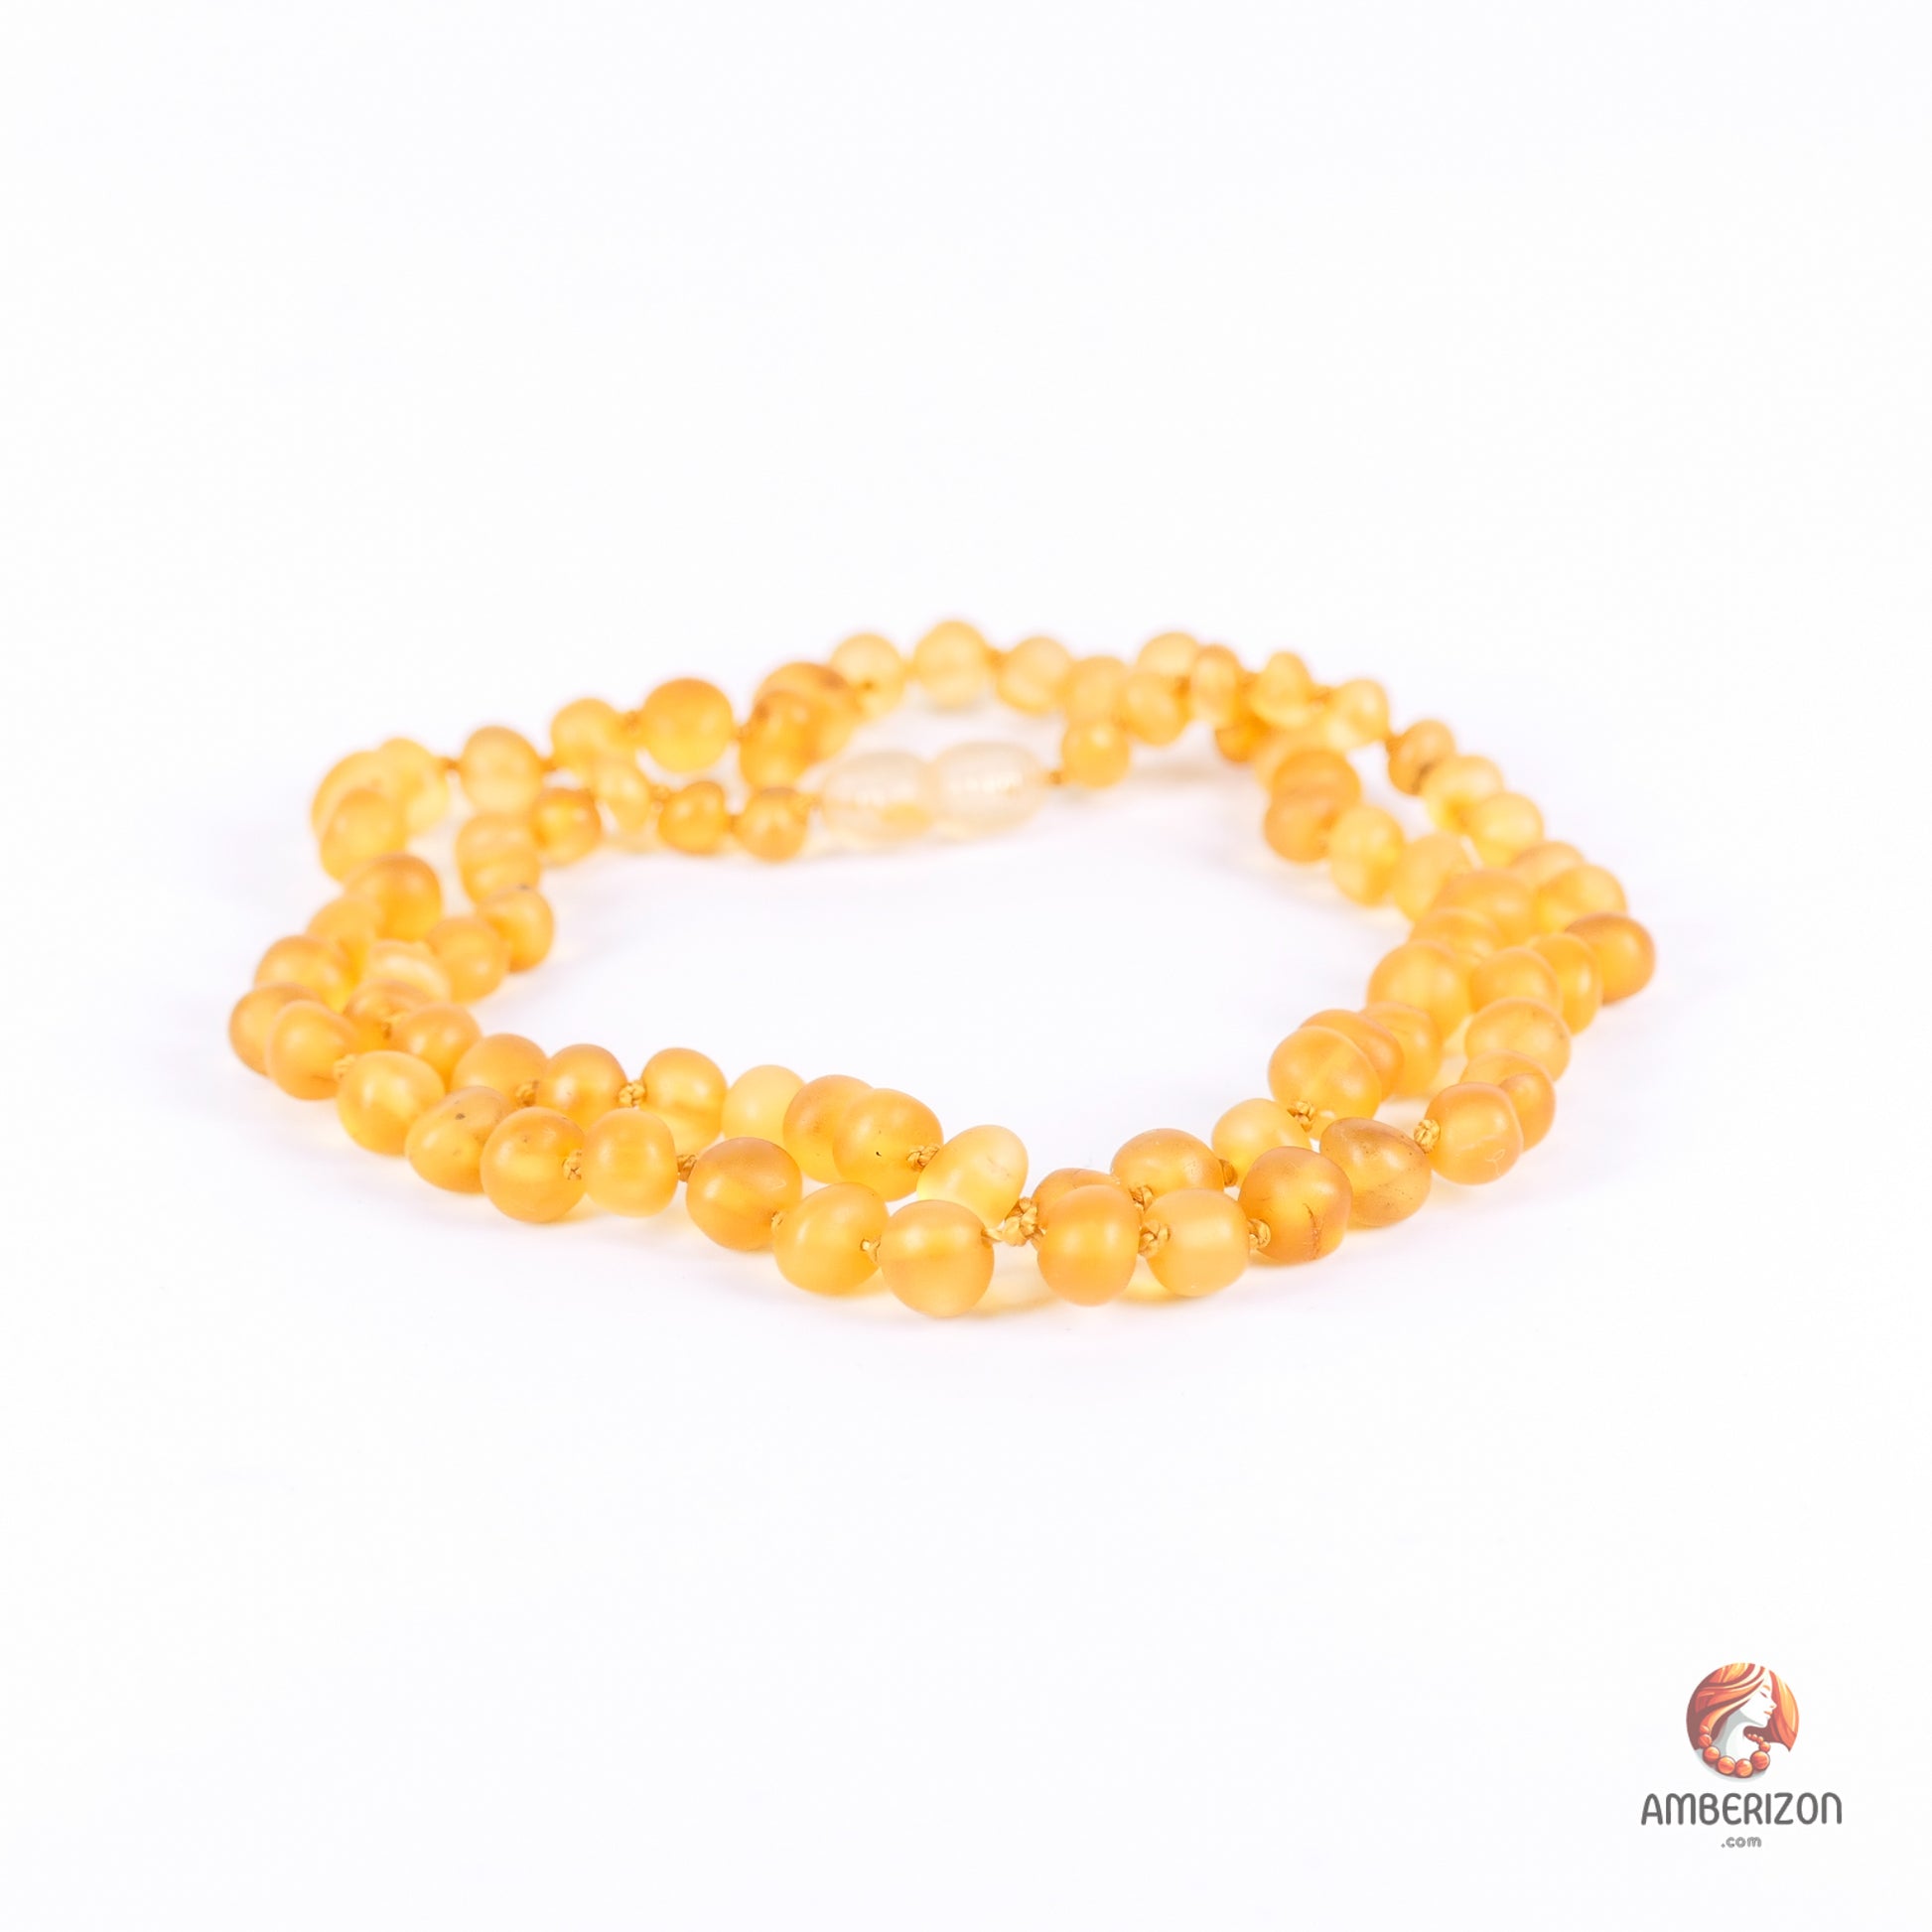 Genuine Baltic Amber Necklace - Handcrafted in Lithuania - Raw Amber  Beads